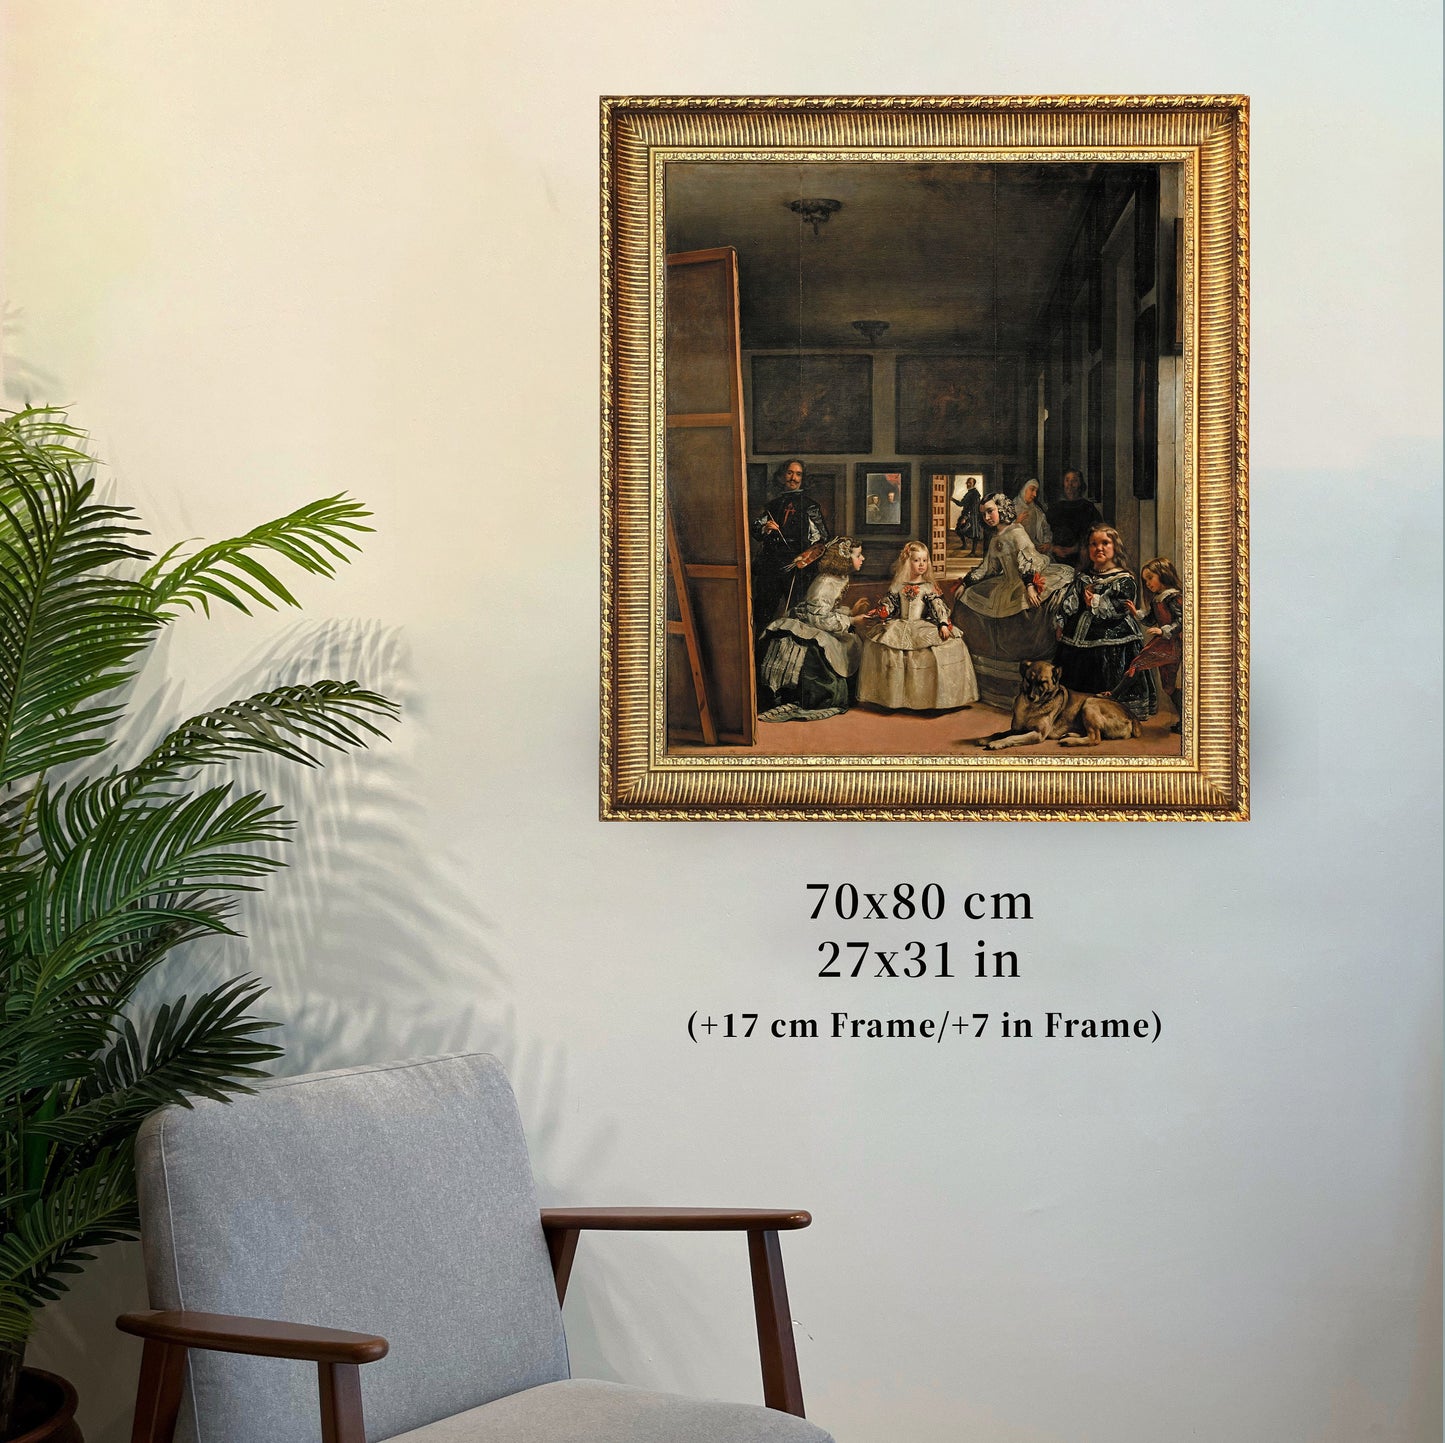 Las Meninas by Diego Velázquez, 3d Printed with texture and brush strokes looks like original oil-painting, code:026